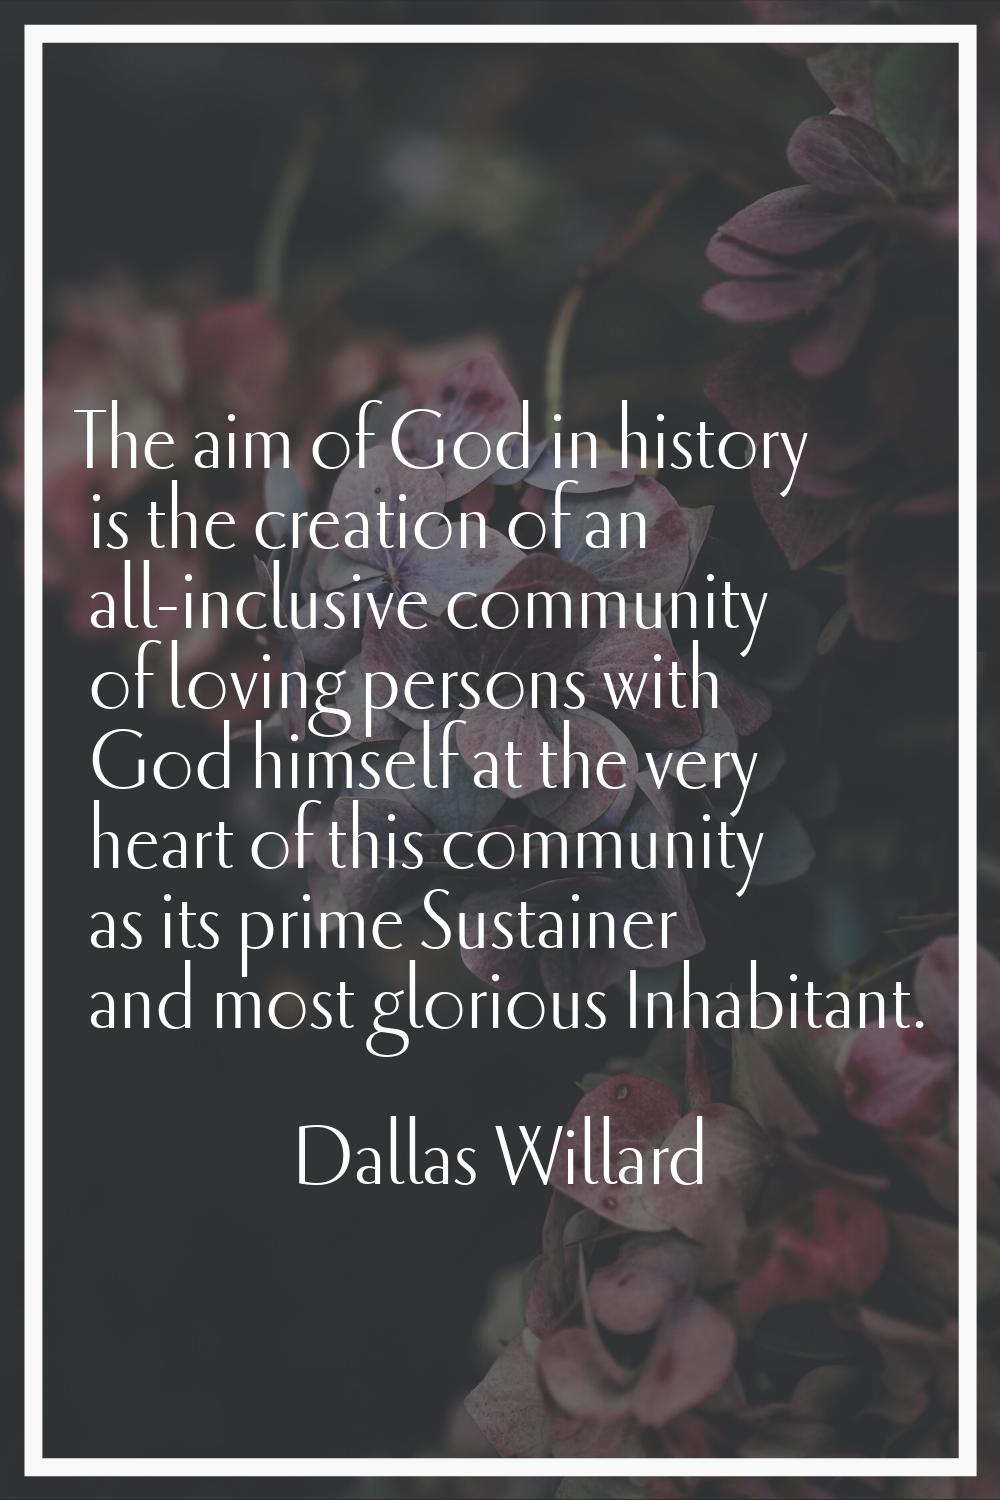 The aim of God in history is the creation of an all-inclusive community of loving persons with God 